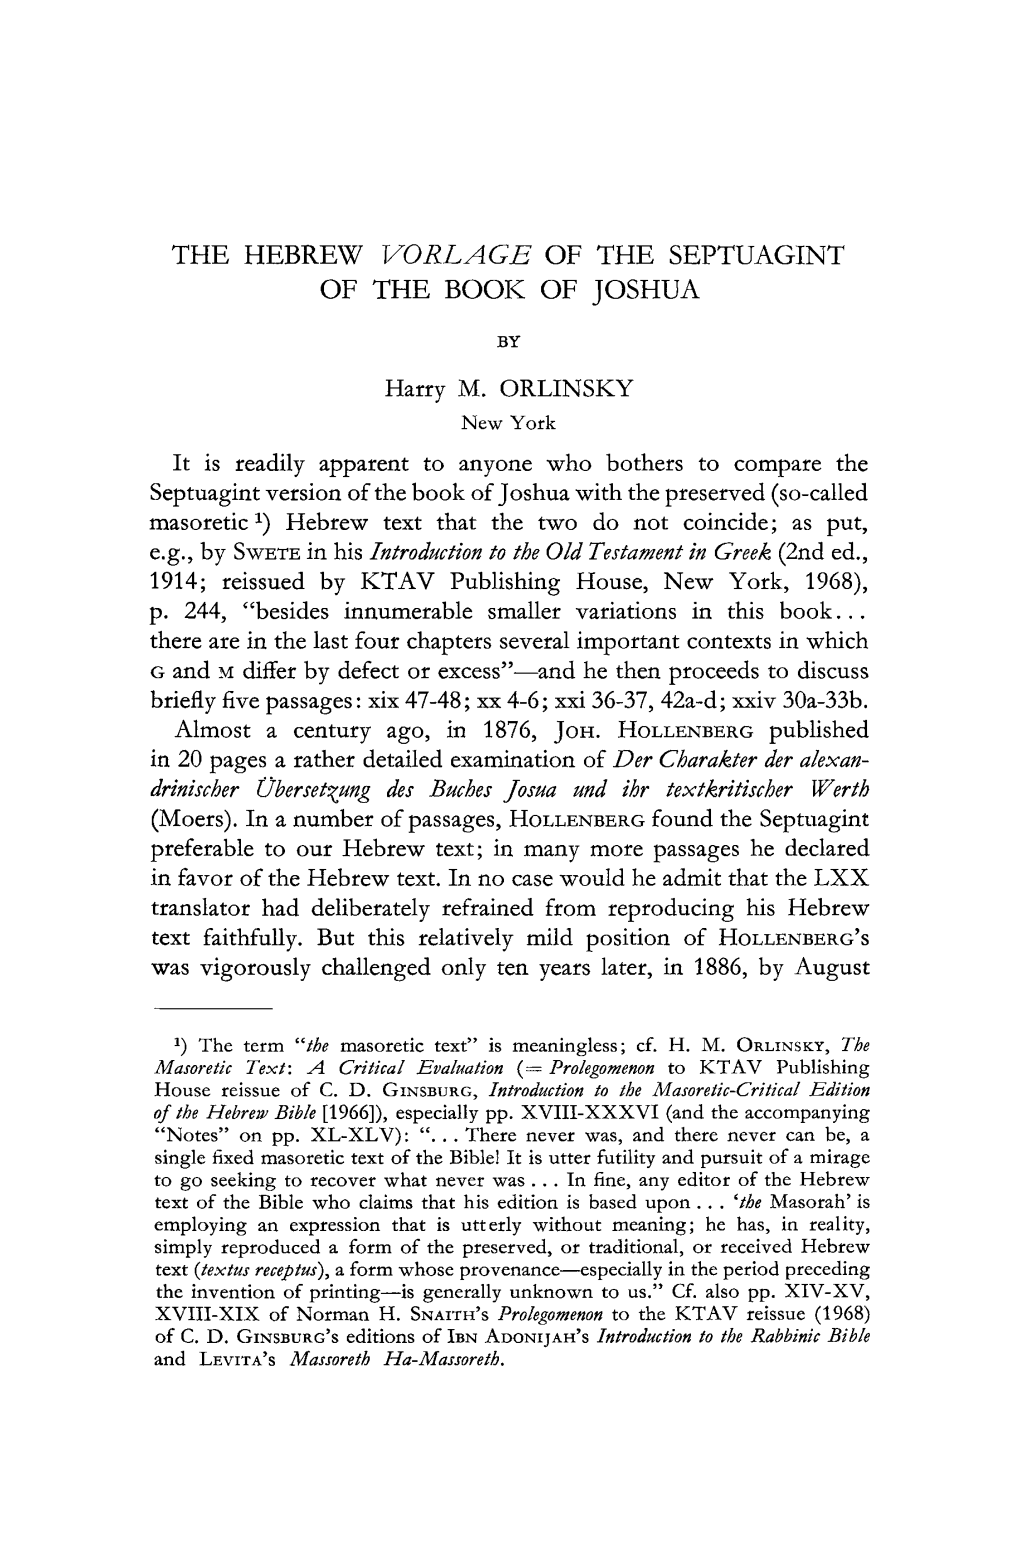 The Hebrew Vorlage of the Septuagint of the Book of Joshua